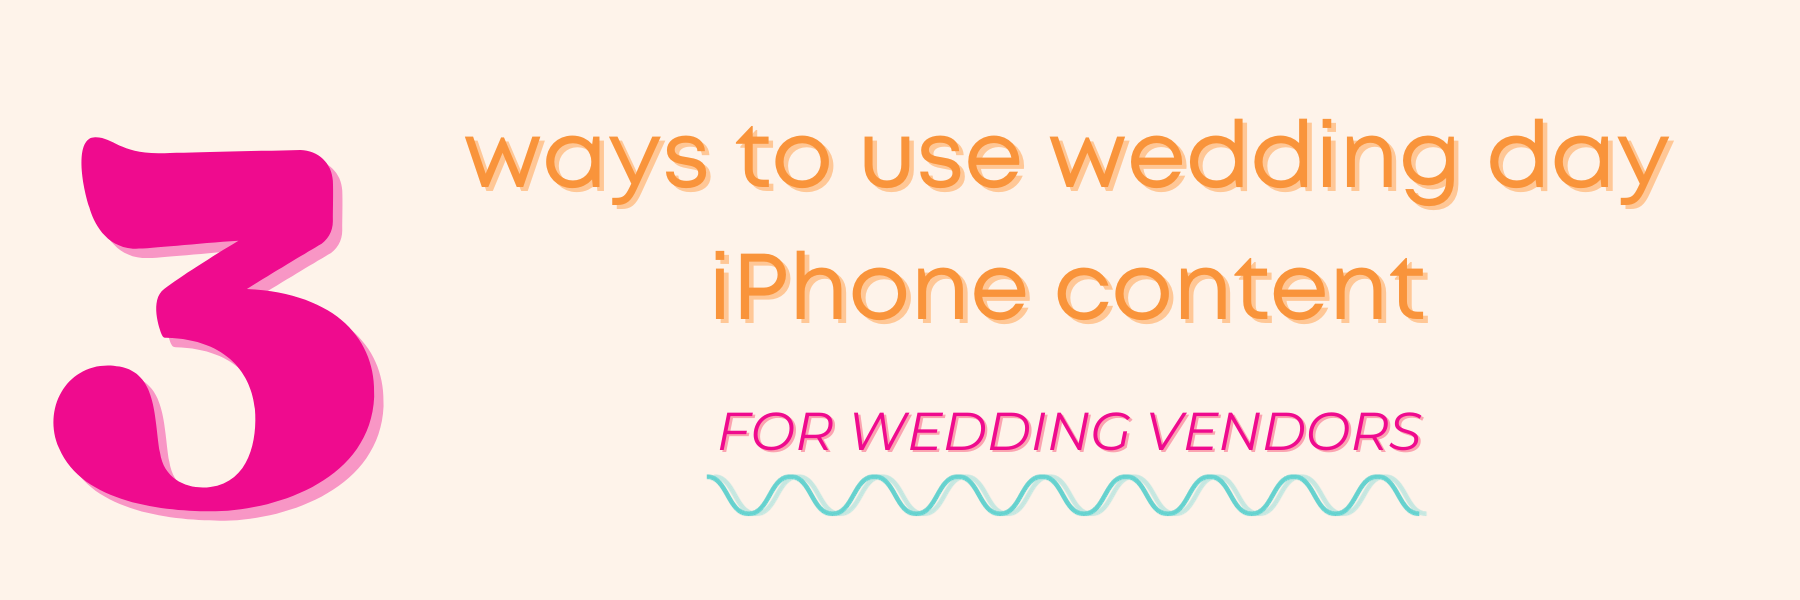 3 ways to use wedding day iPhone content for wedding vendors